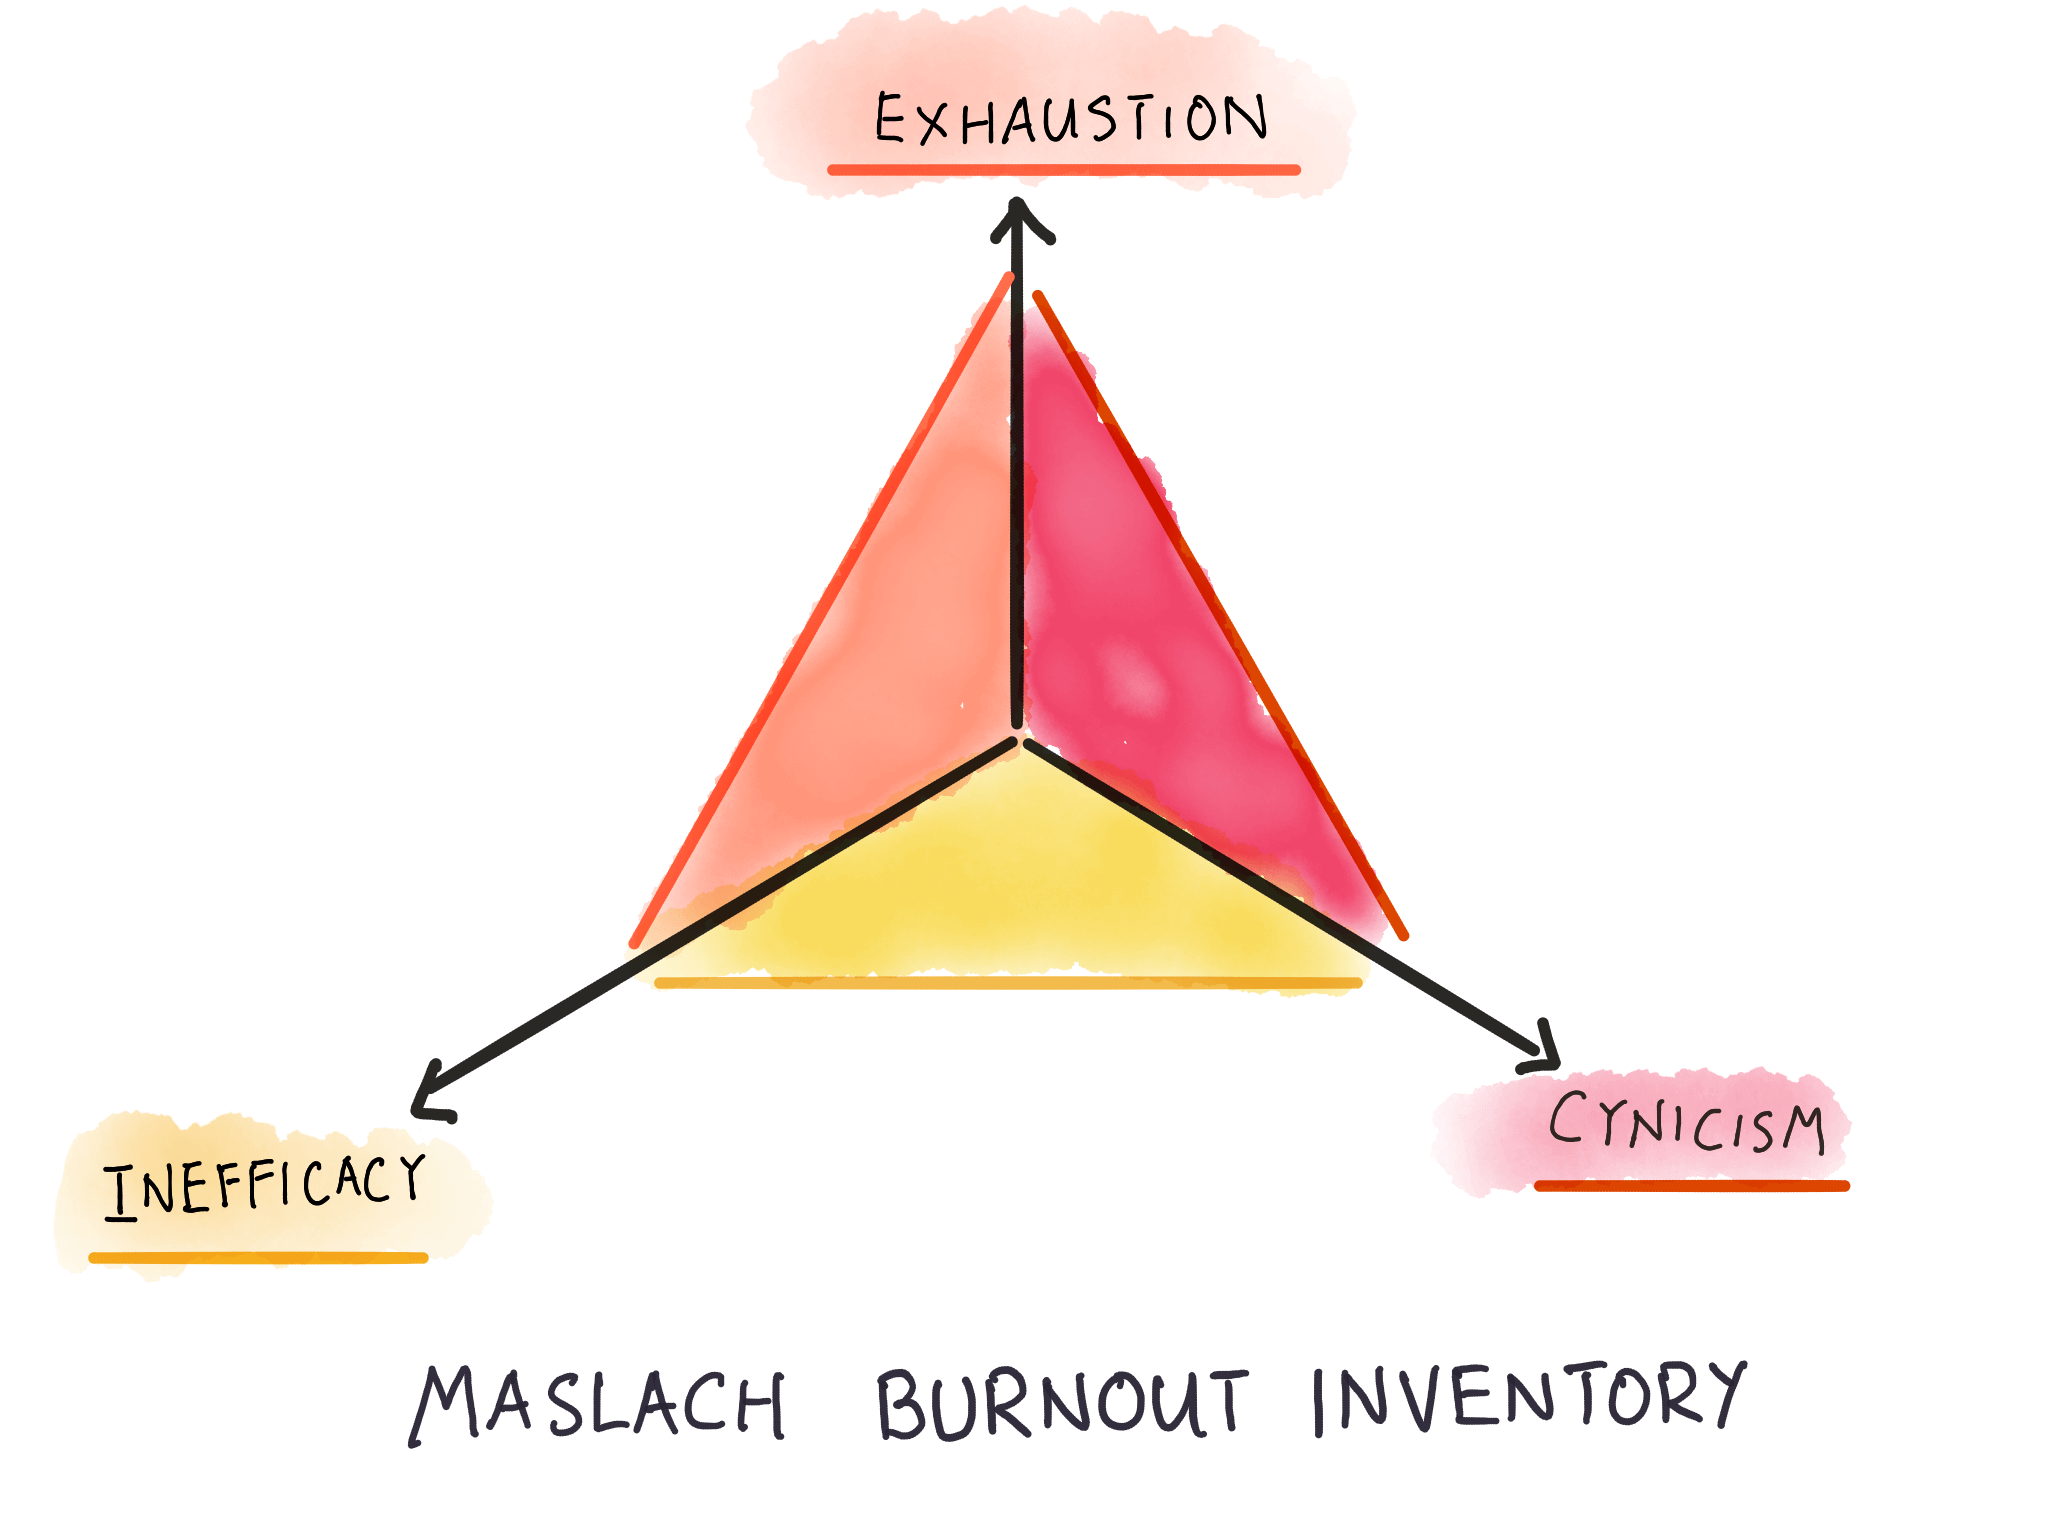 Illustration of the Maslach Burnout Inventory